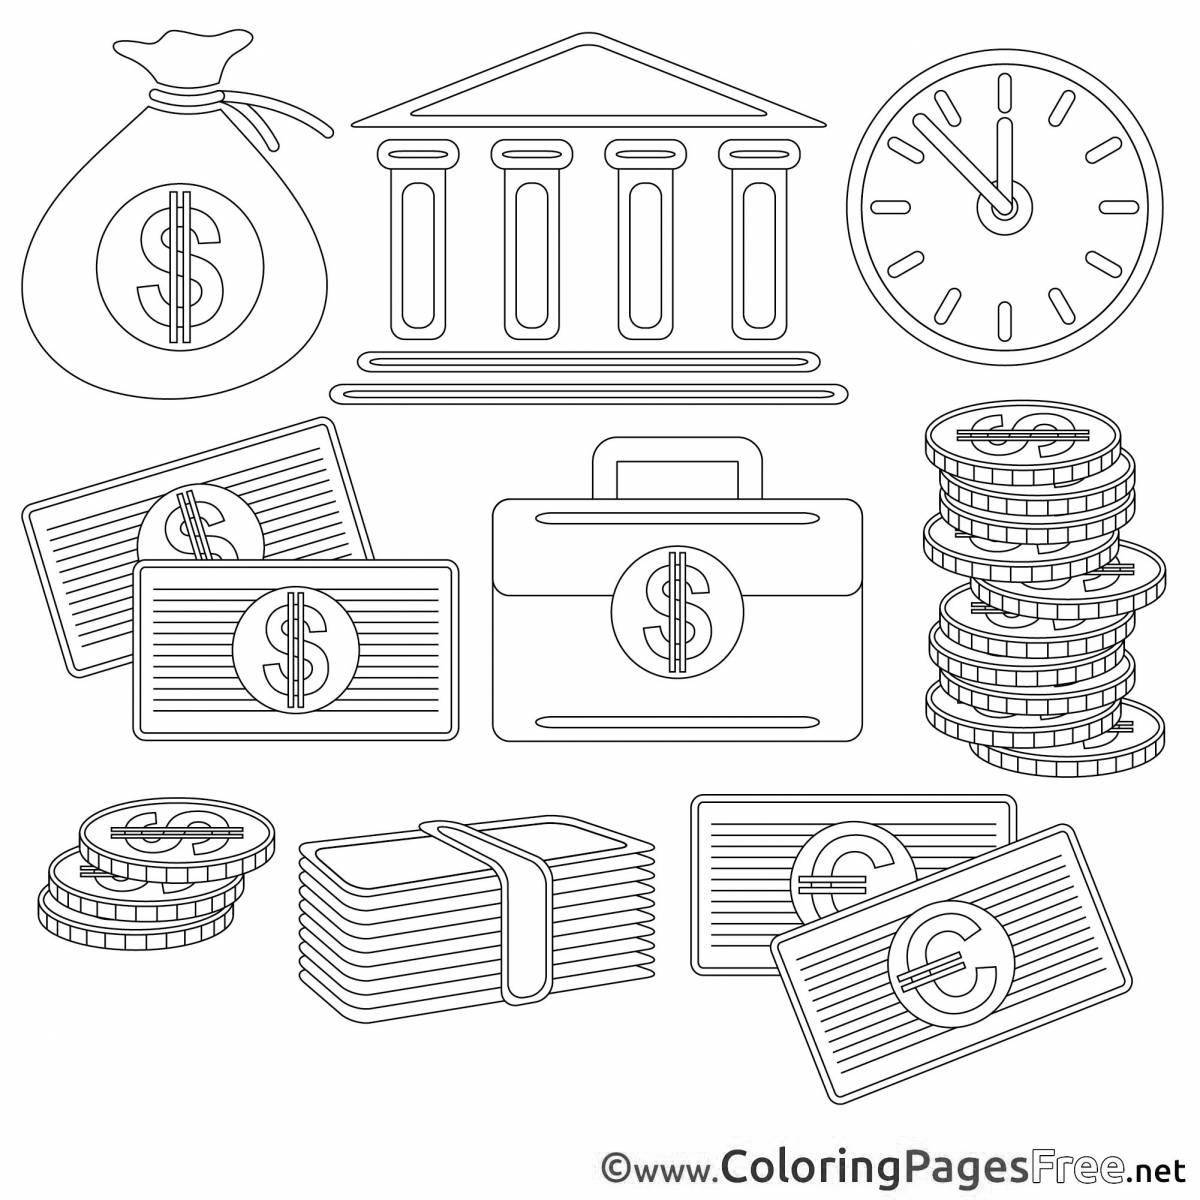 Coloring book funny bank